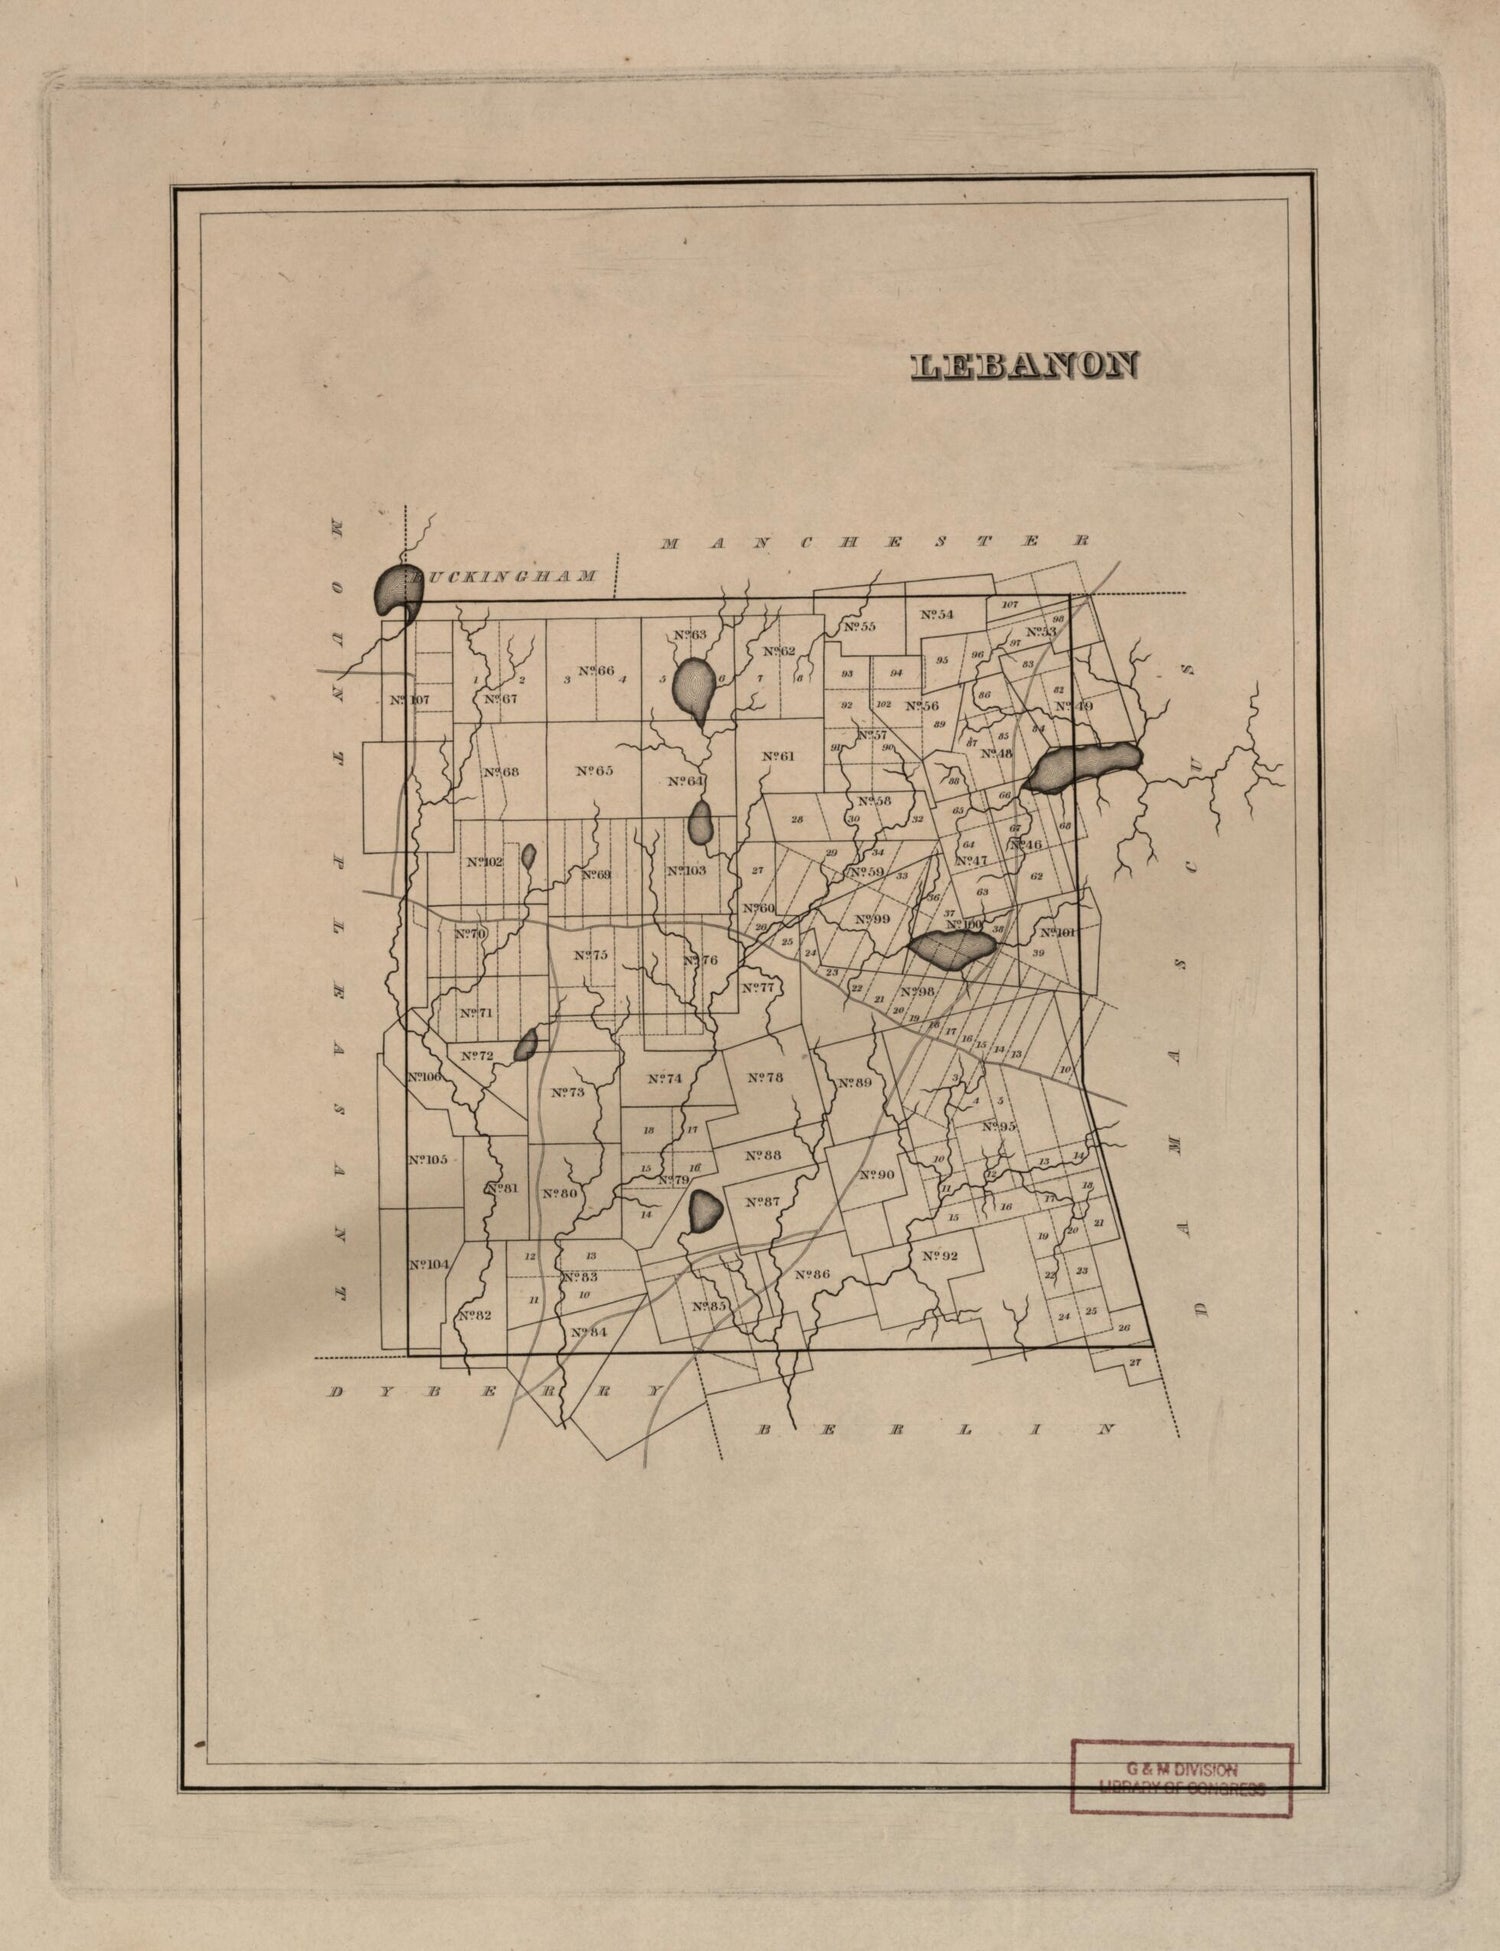 This old map of 1835 from 1828 was created by Phineas Eldridge Hamm in 1828